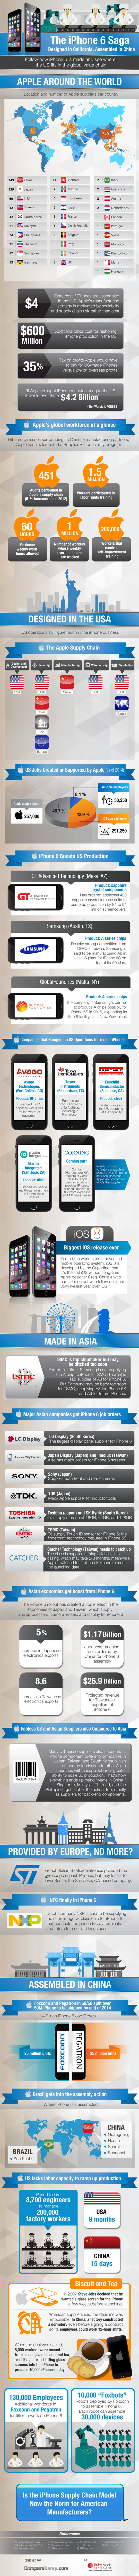 Secrets of iPhone Manufacturing Proces: How And Where It's Made